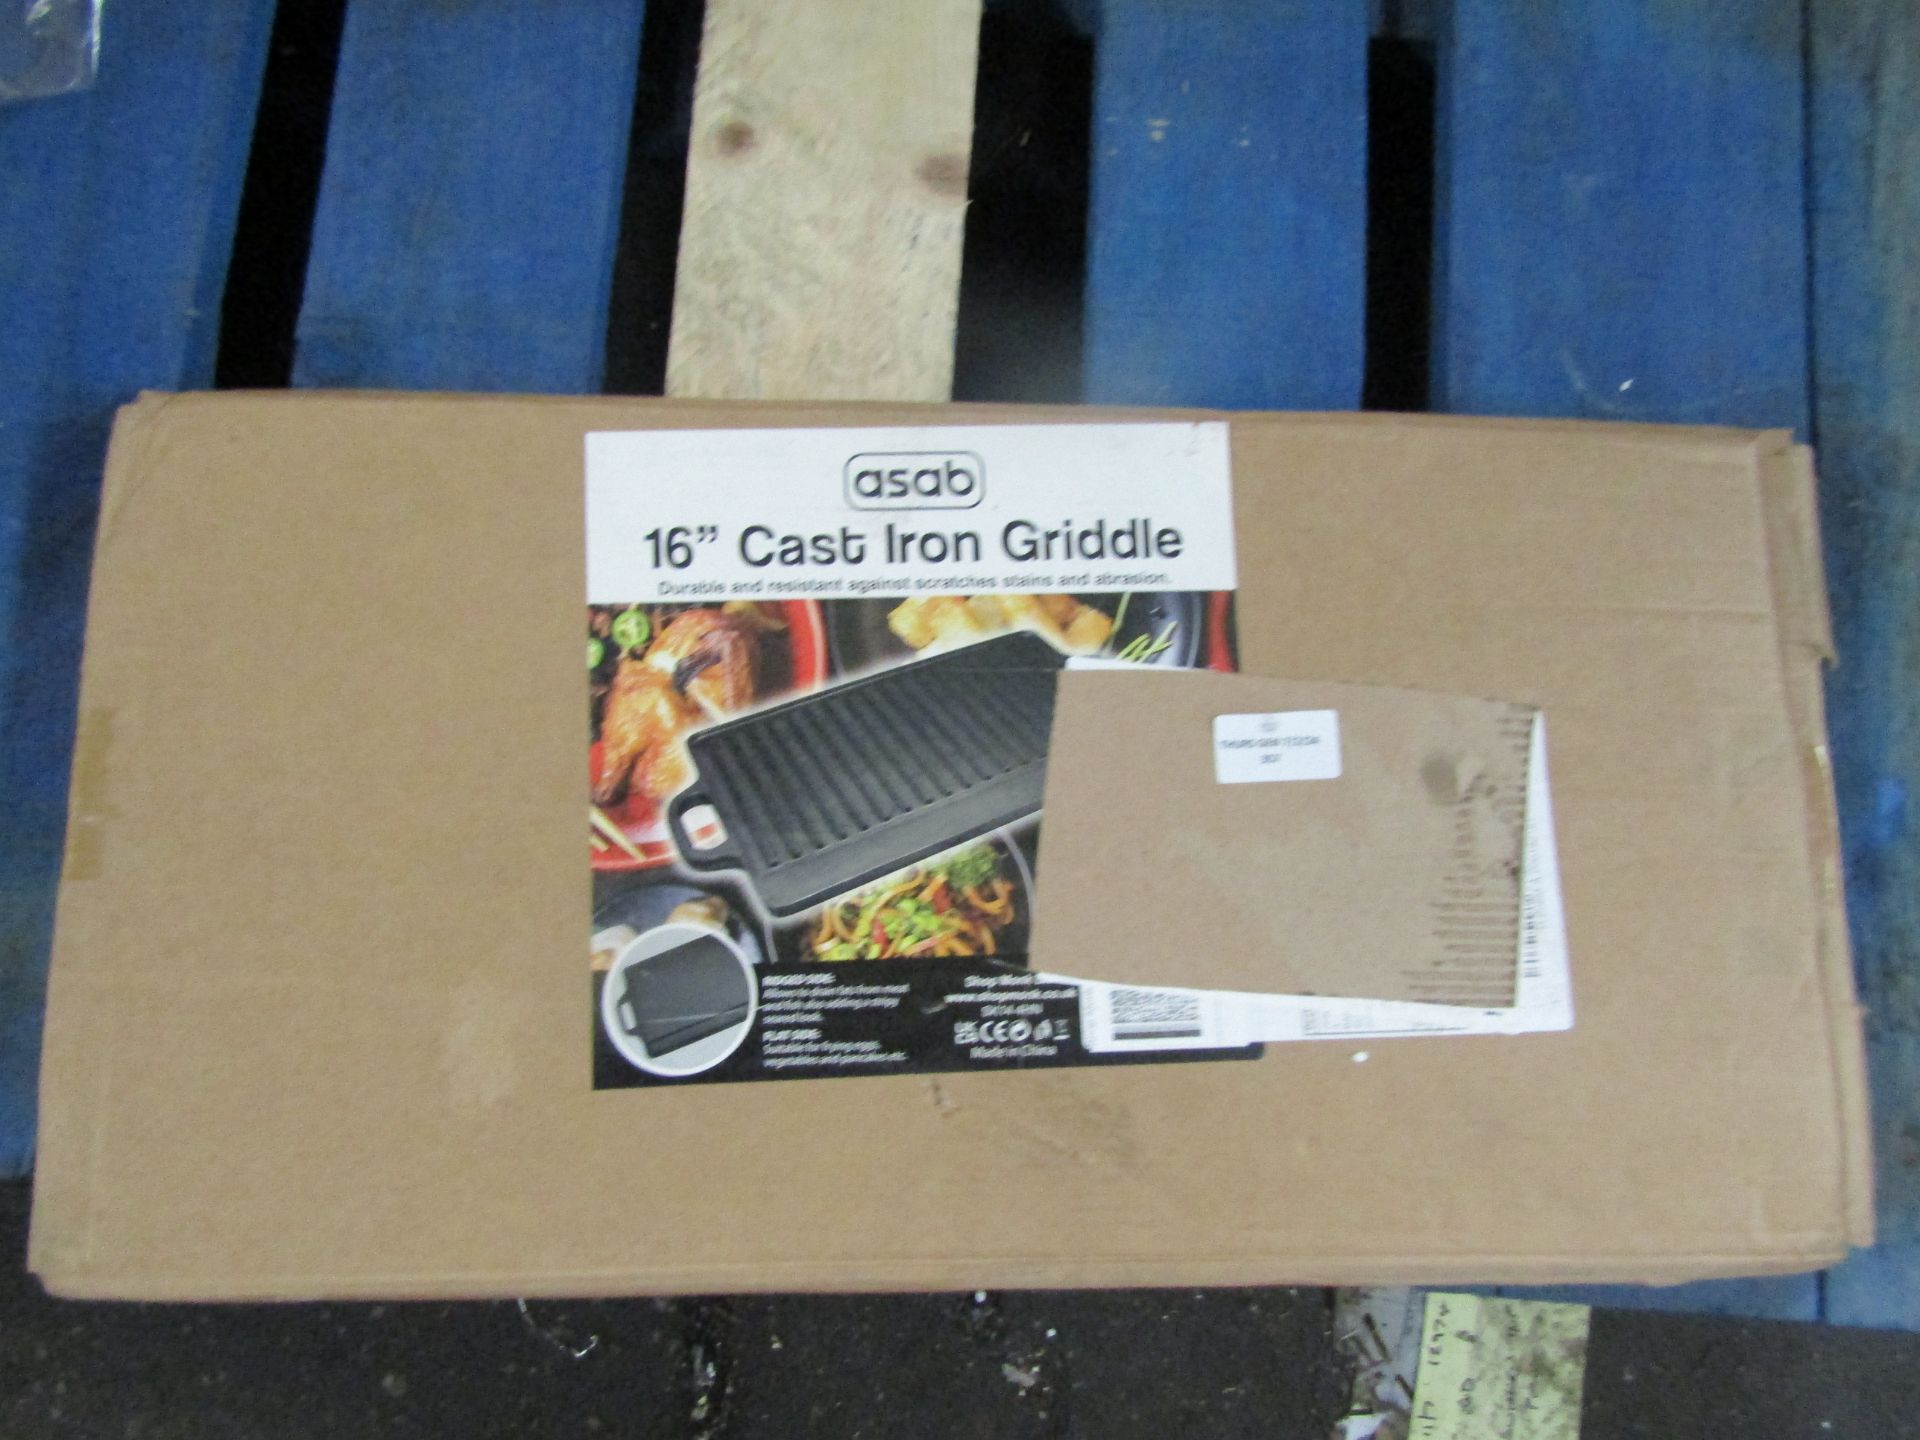 Asab - 16" Cast Iron Griddle - Unchecked & Boxed.